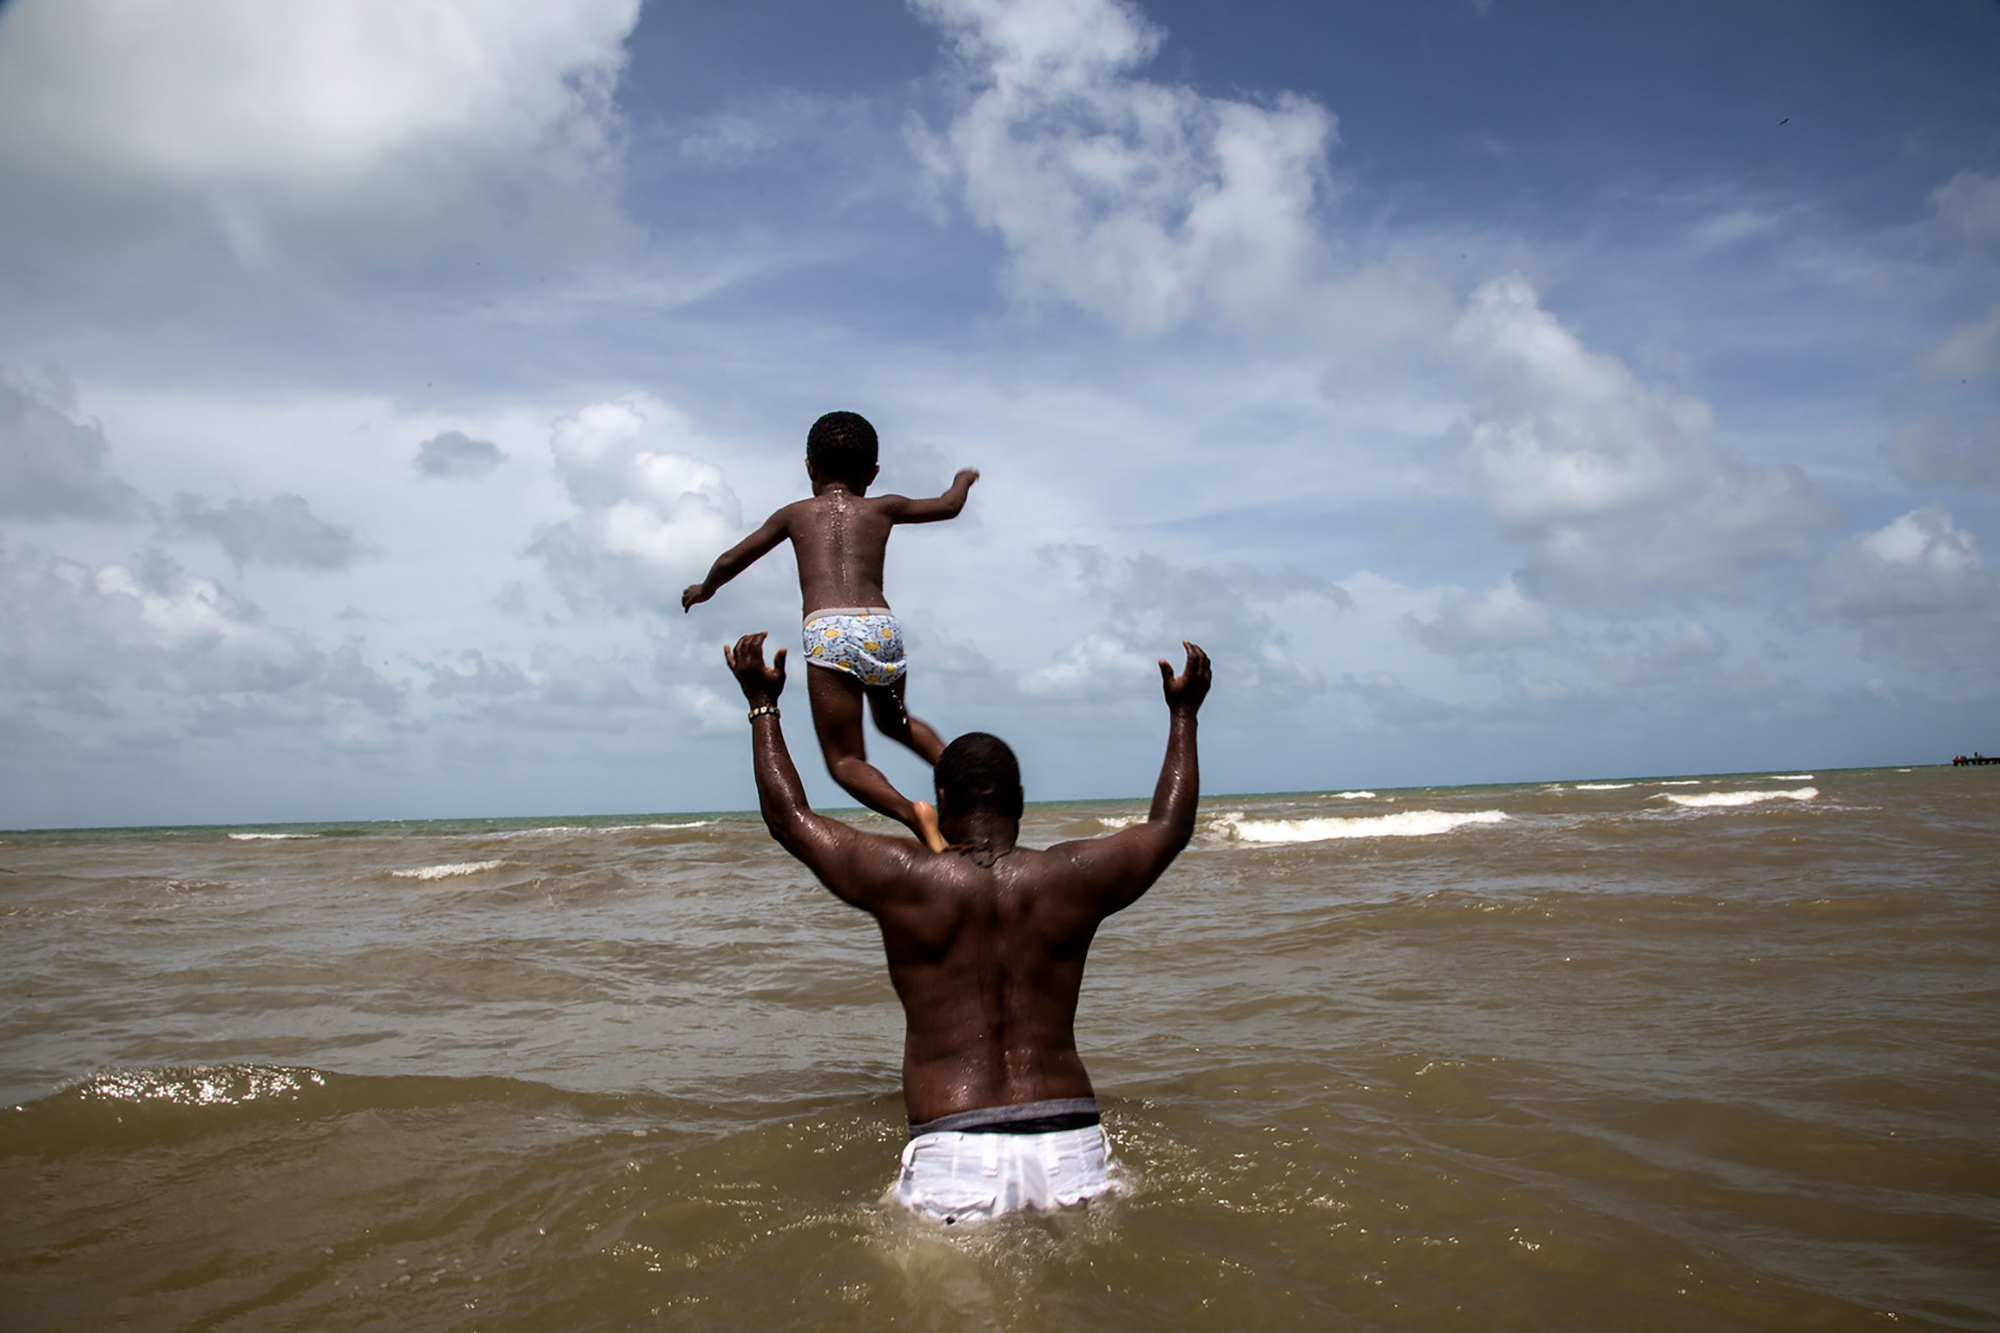 Belize, 2016: Orin, 4, playing at the seashore with his father, Marshall Mejia, in their hometown of Dangriga.